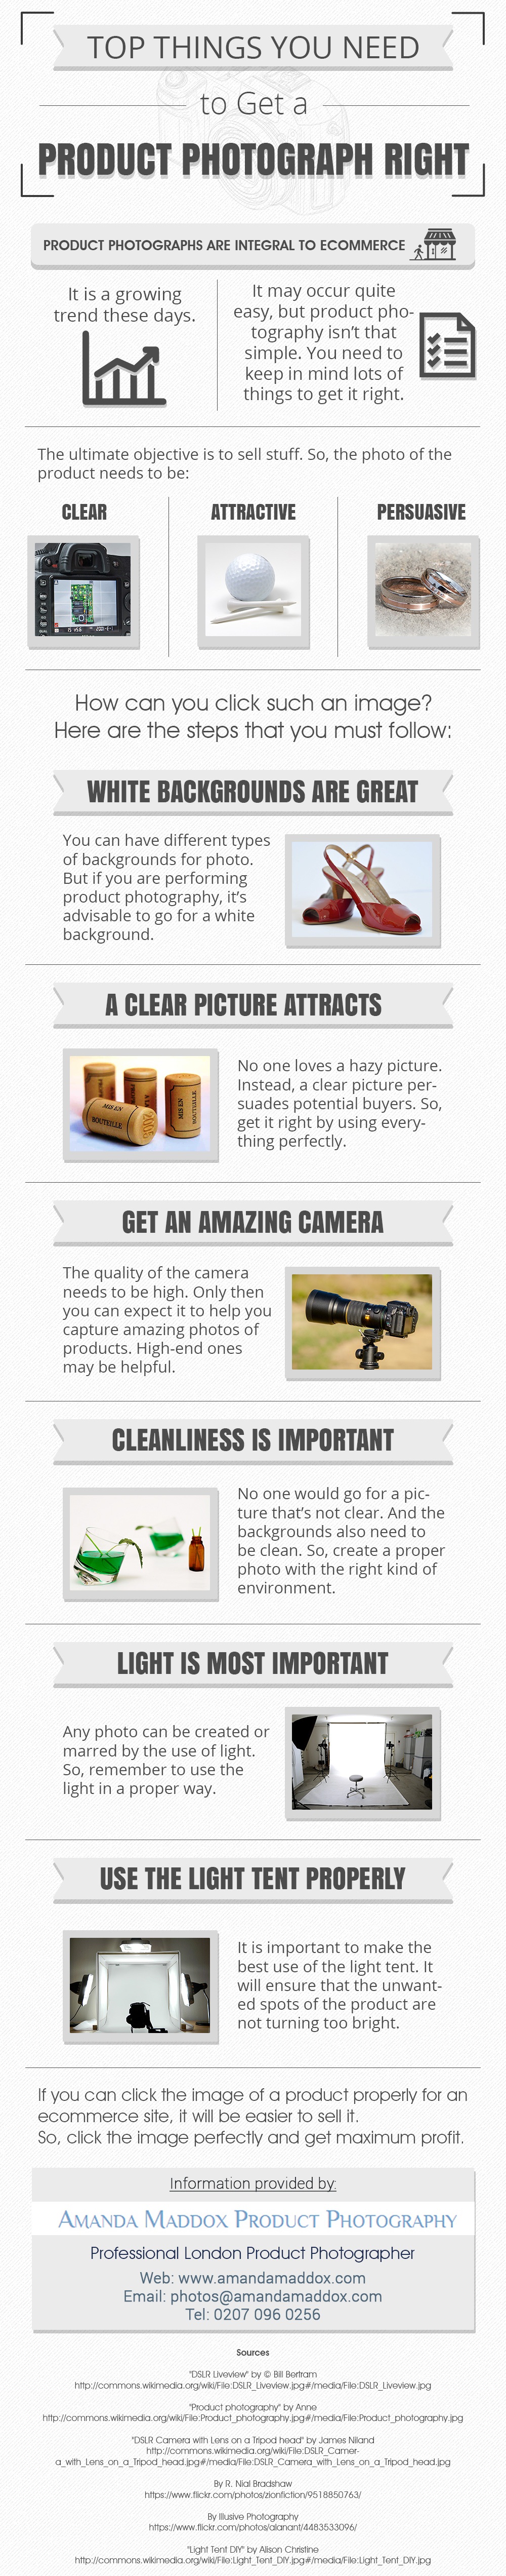 Top Things You Need to Get a Product Photograph Right